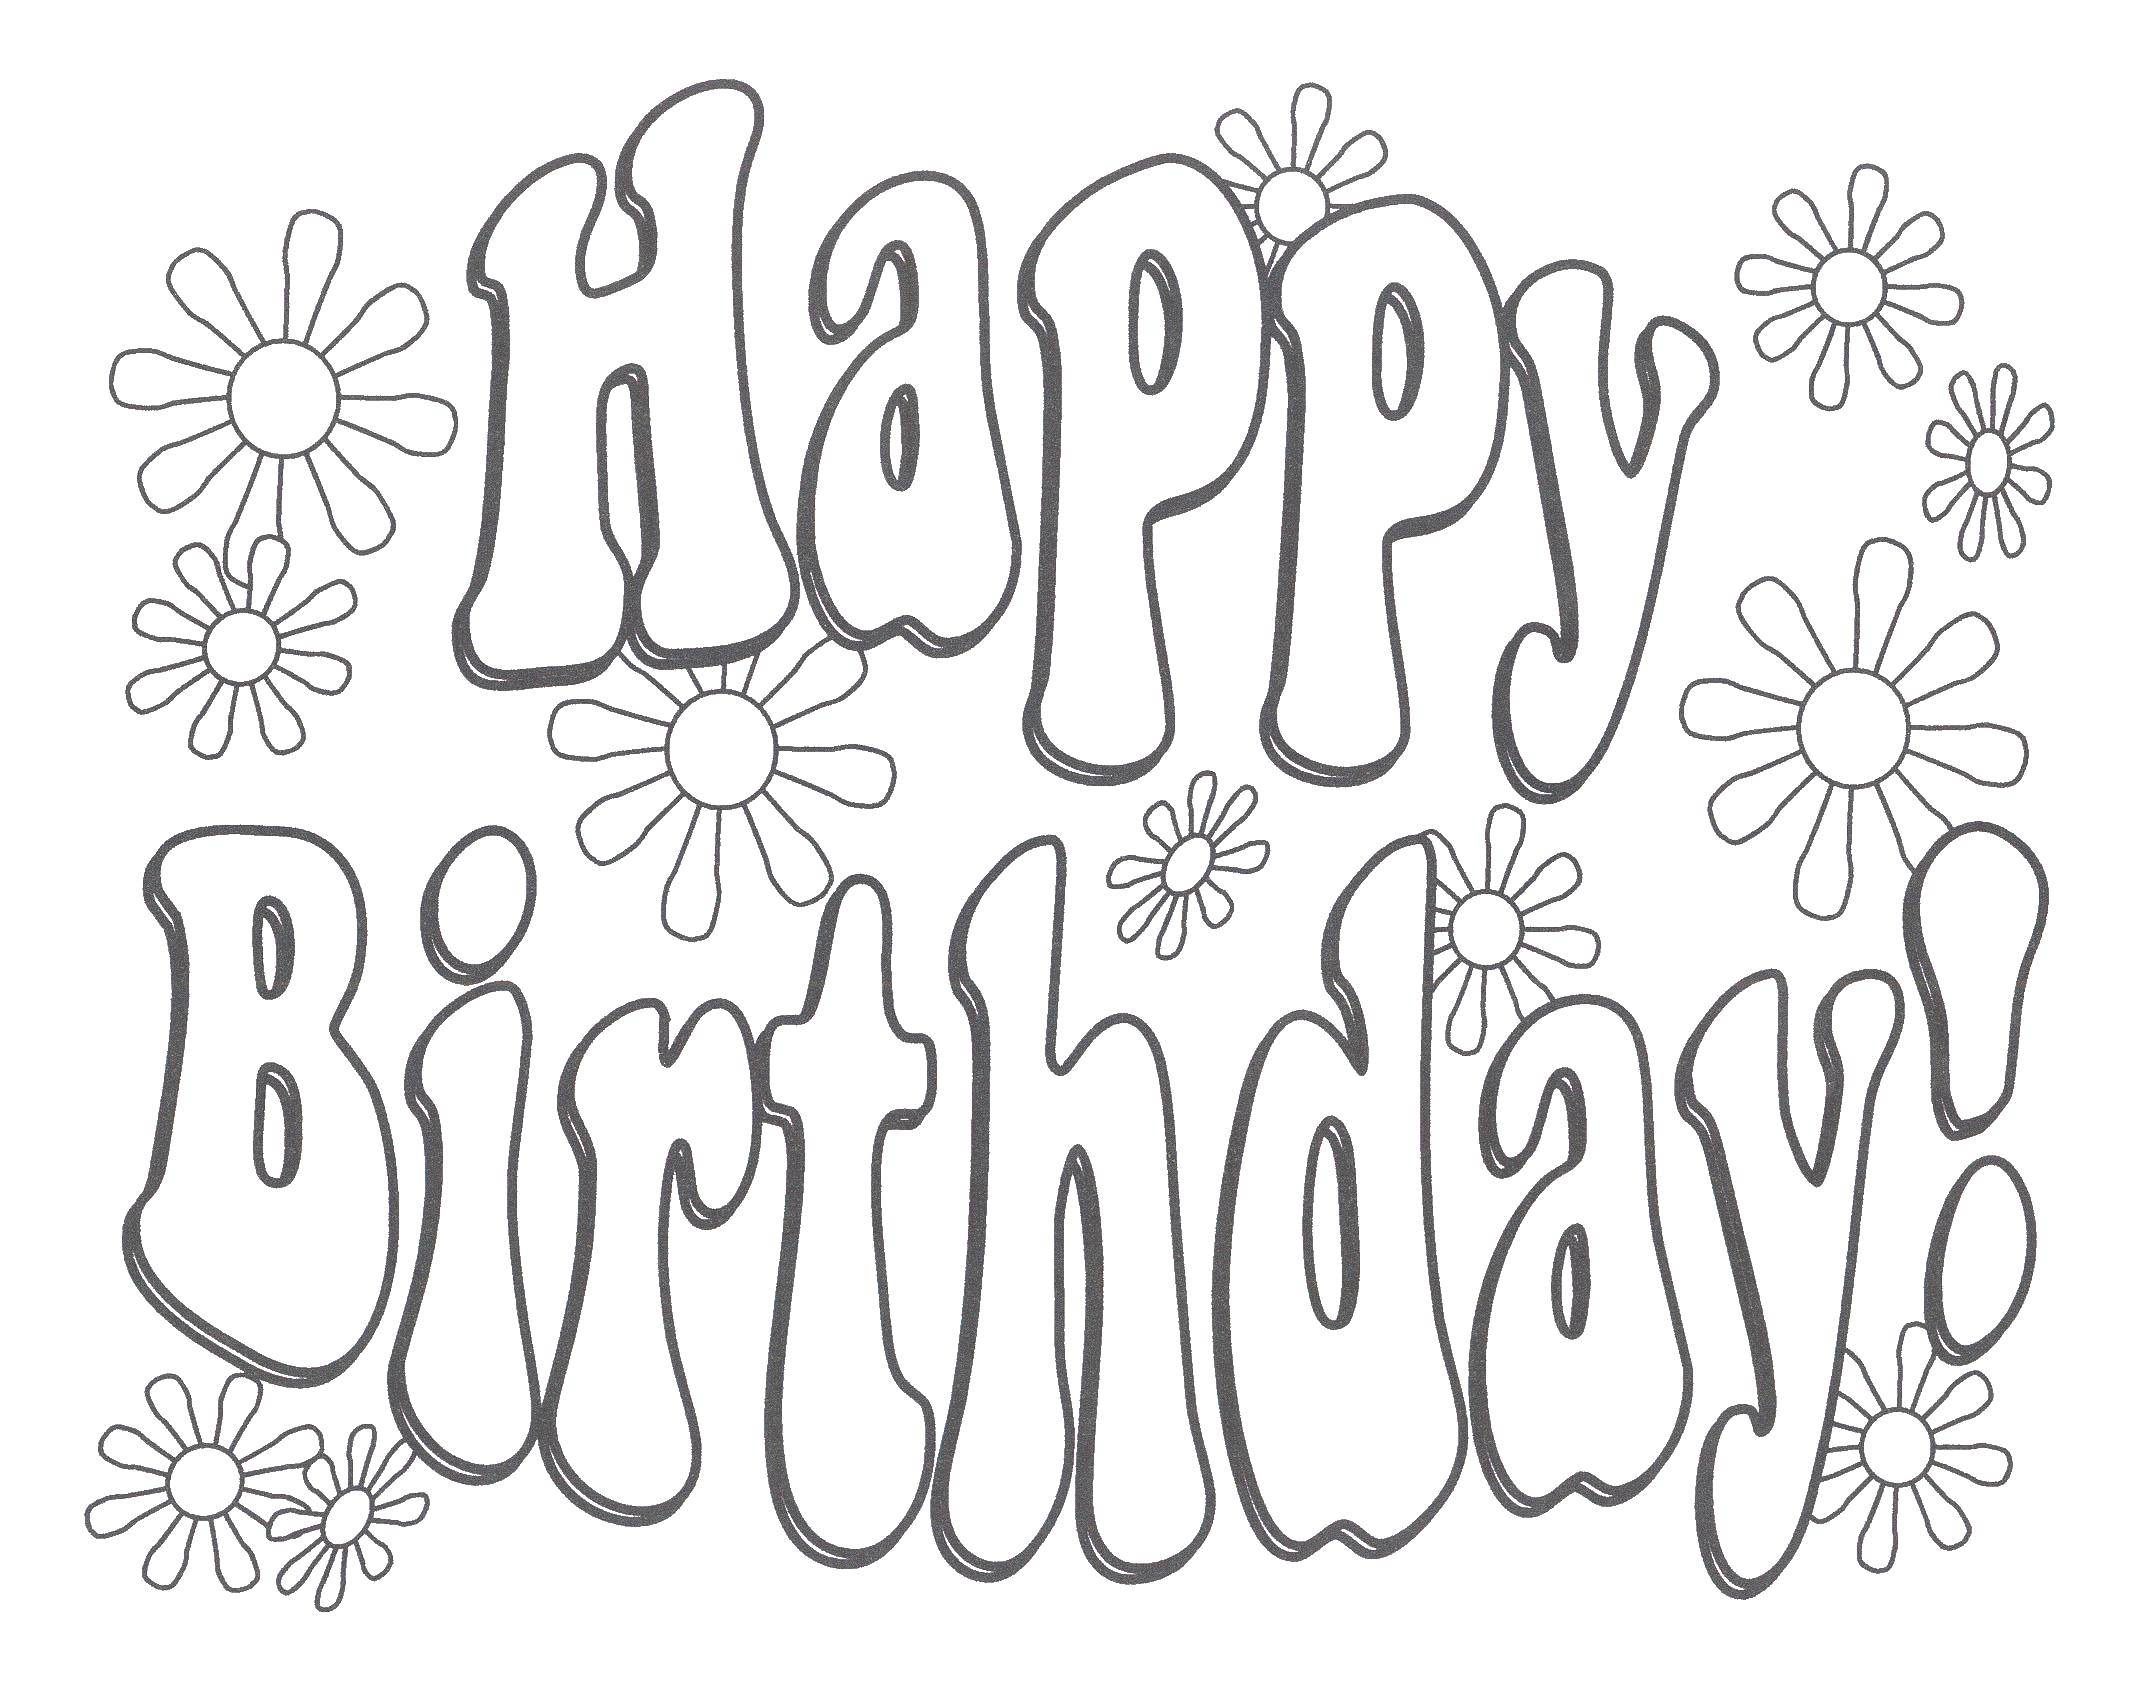 Coloring Happy birthday. Category birthday. Tags:  birthday, label, greeting.